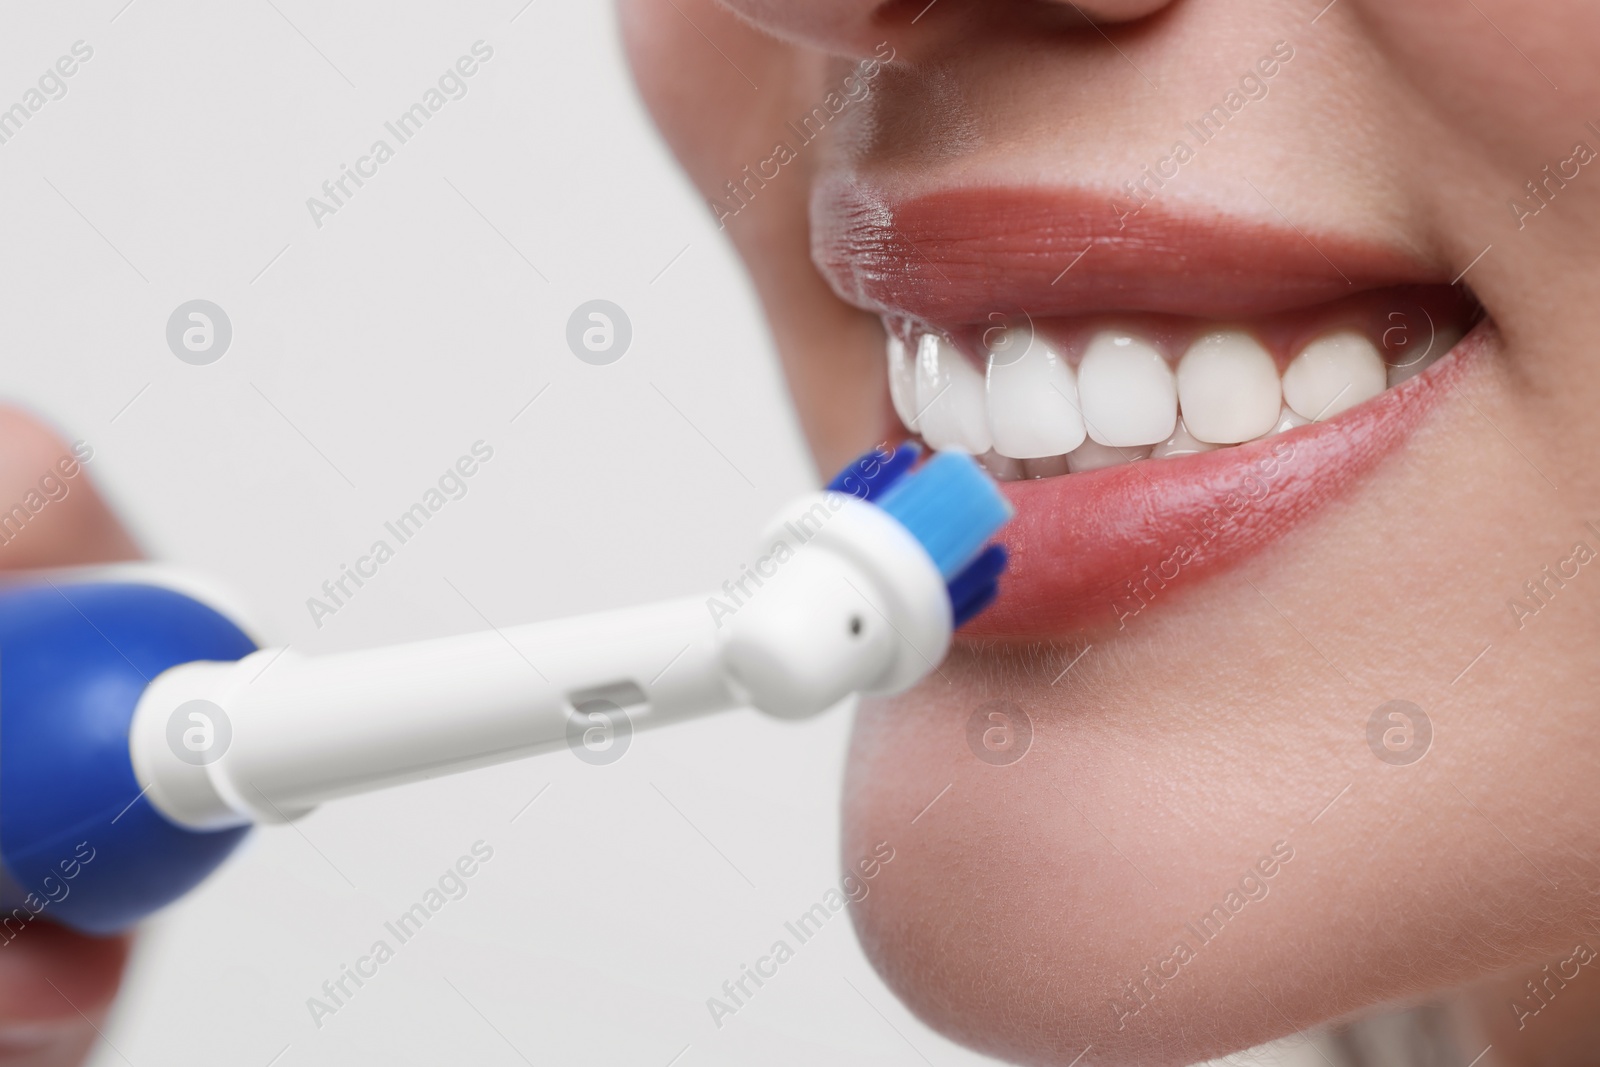 Photo of Woman brushing her teeth with electric toothbrush on white background, closeup